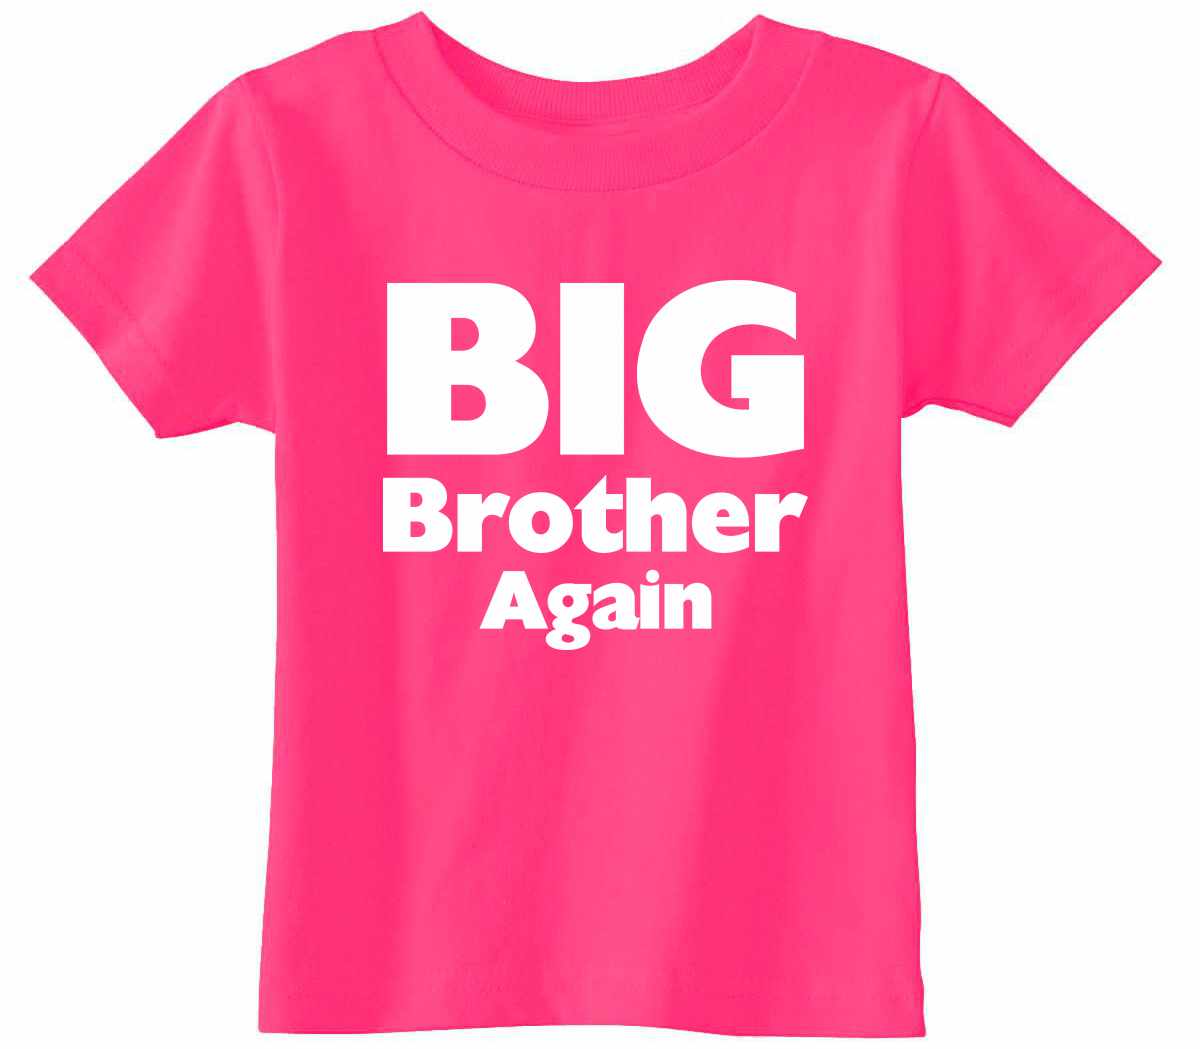 Big Brother Again on Infant-Toddler T-Shirt (#1333-7)